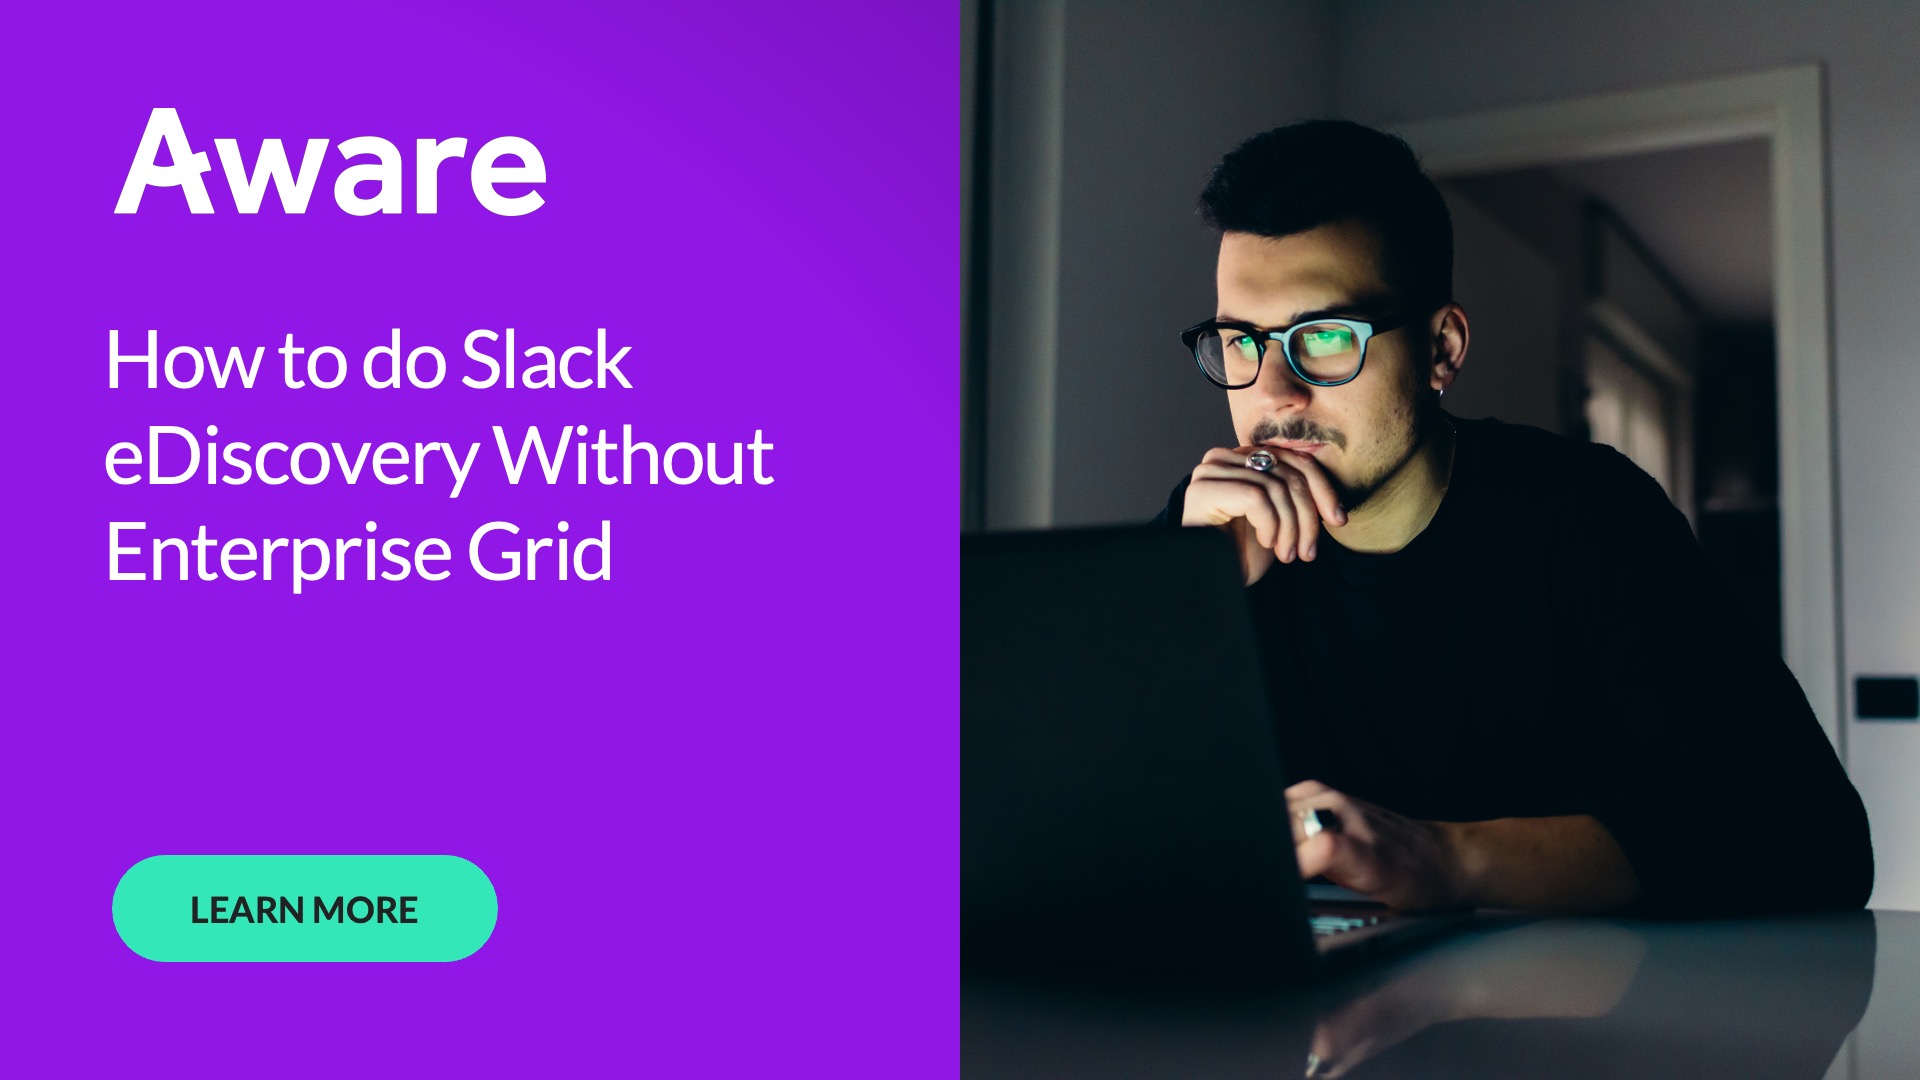 How to do Slack eDiscovery Without Enterprise Grid